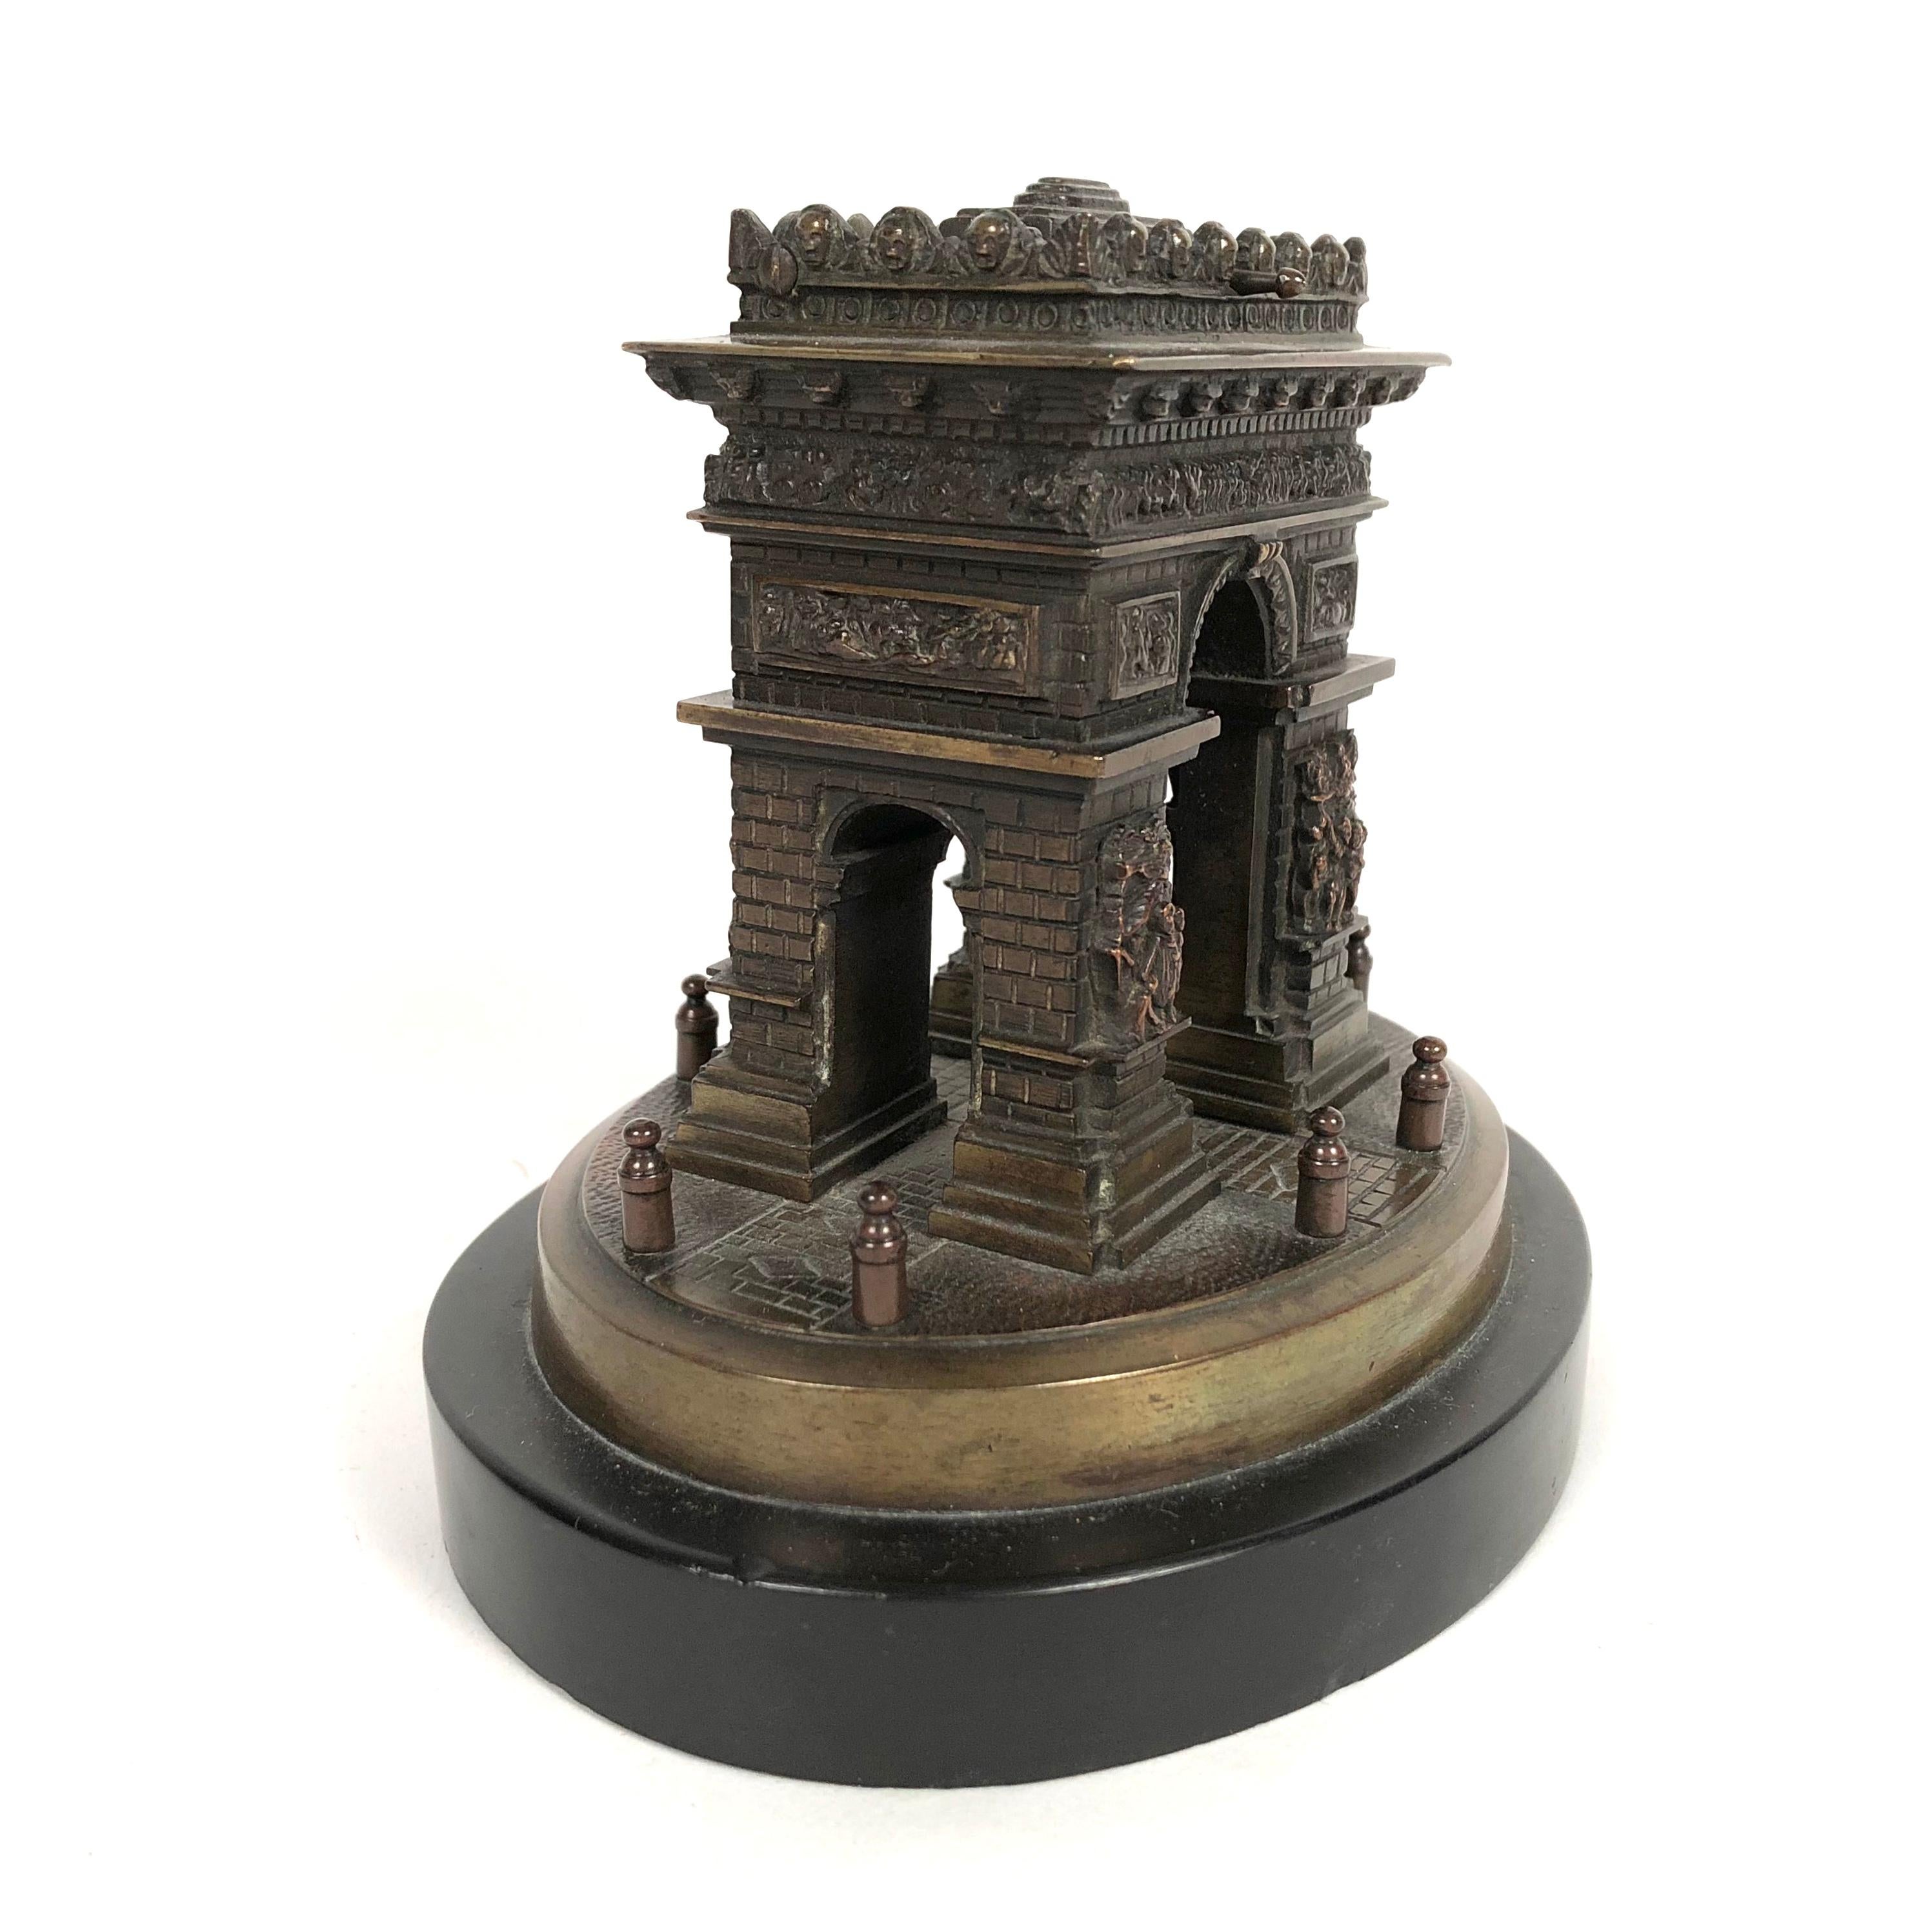 A small Grand Tour bronze architectural model of the Arc de Triomphe in Paris, mounted on black marble base. Created as a souvenir in the late 19th century for travelers to Paris, this model is very well detailed, showing the sculptural friezes on